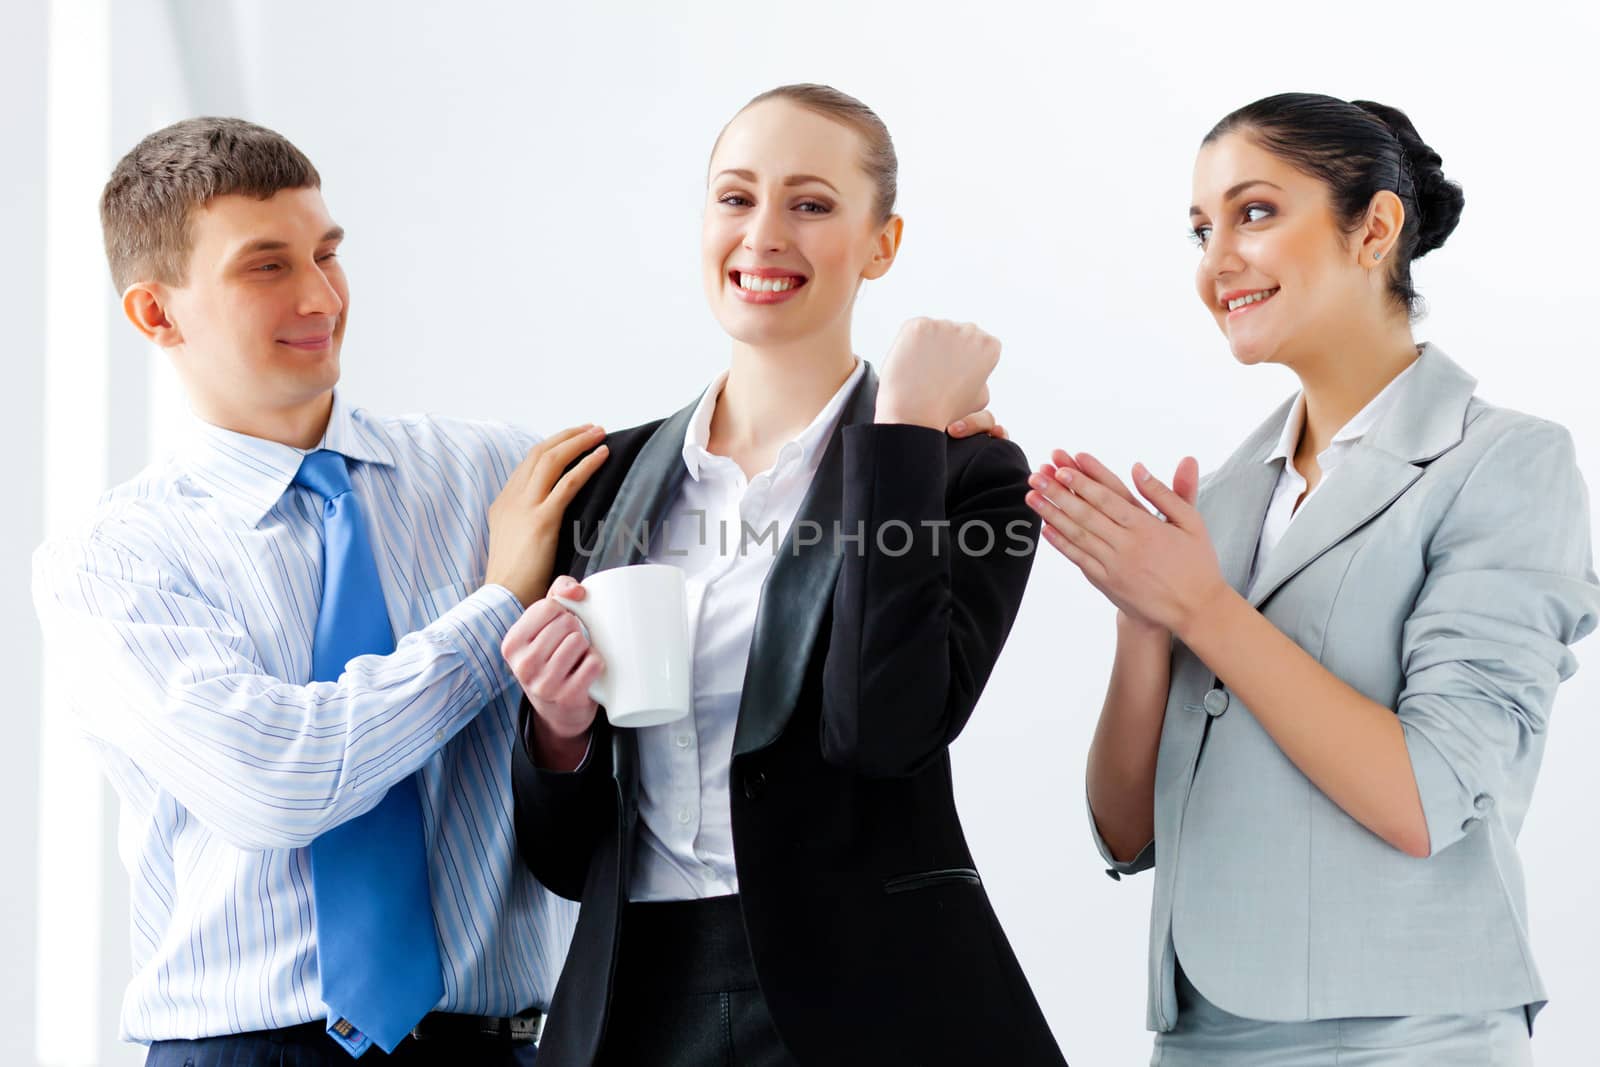 Image of three young businesspeople laughing joyfully